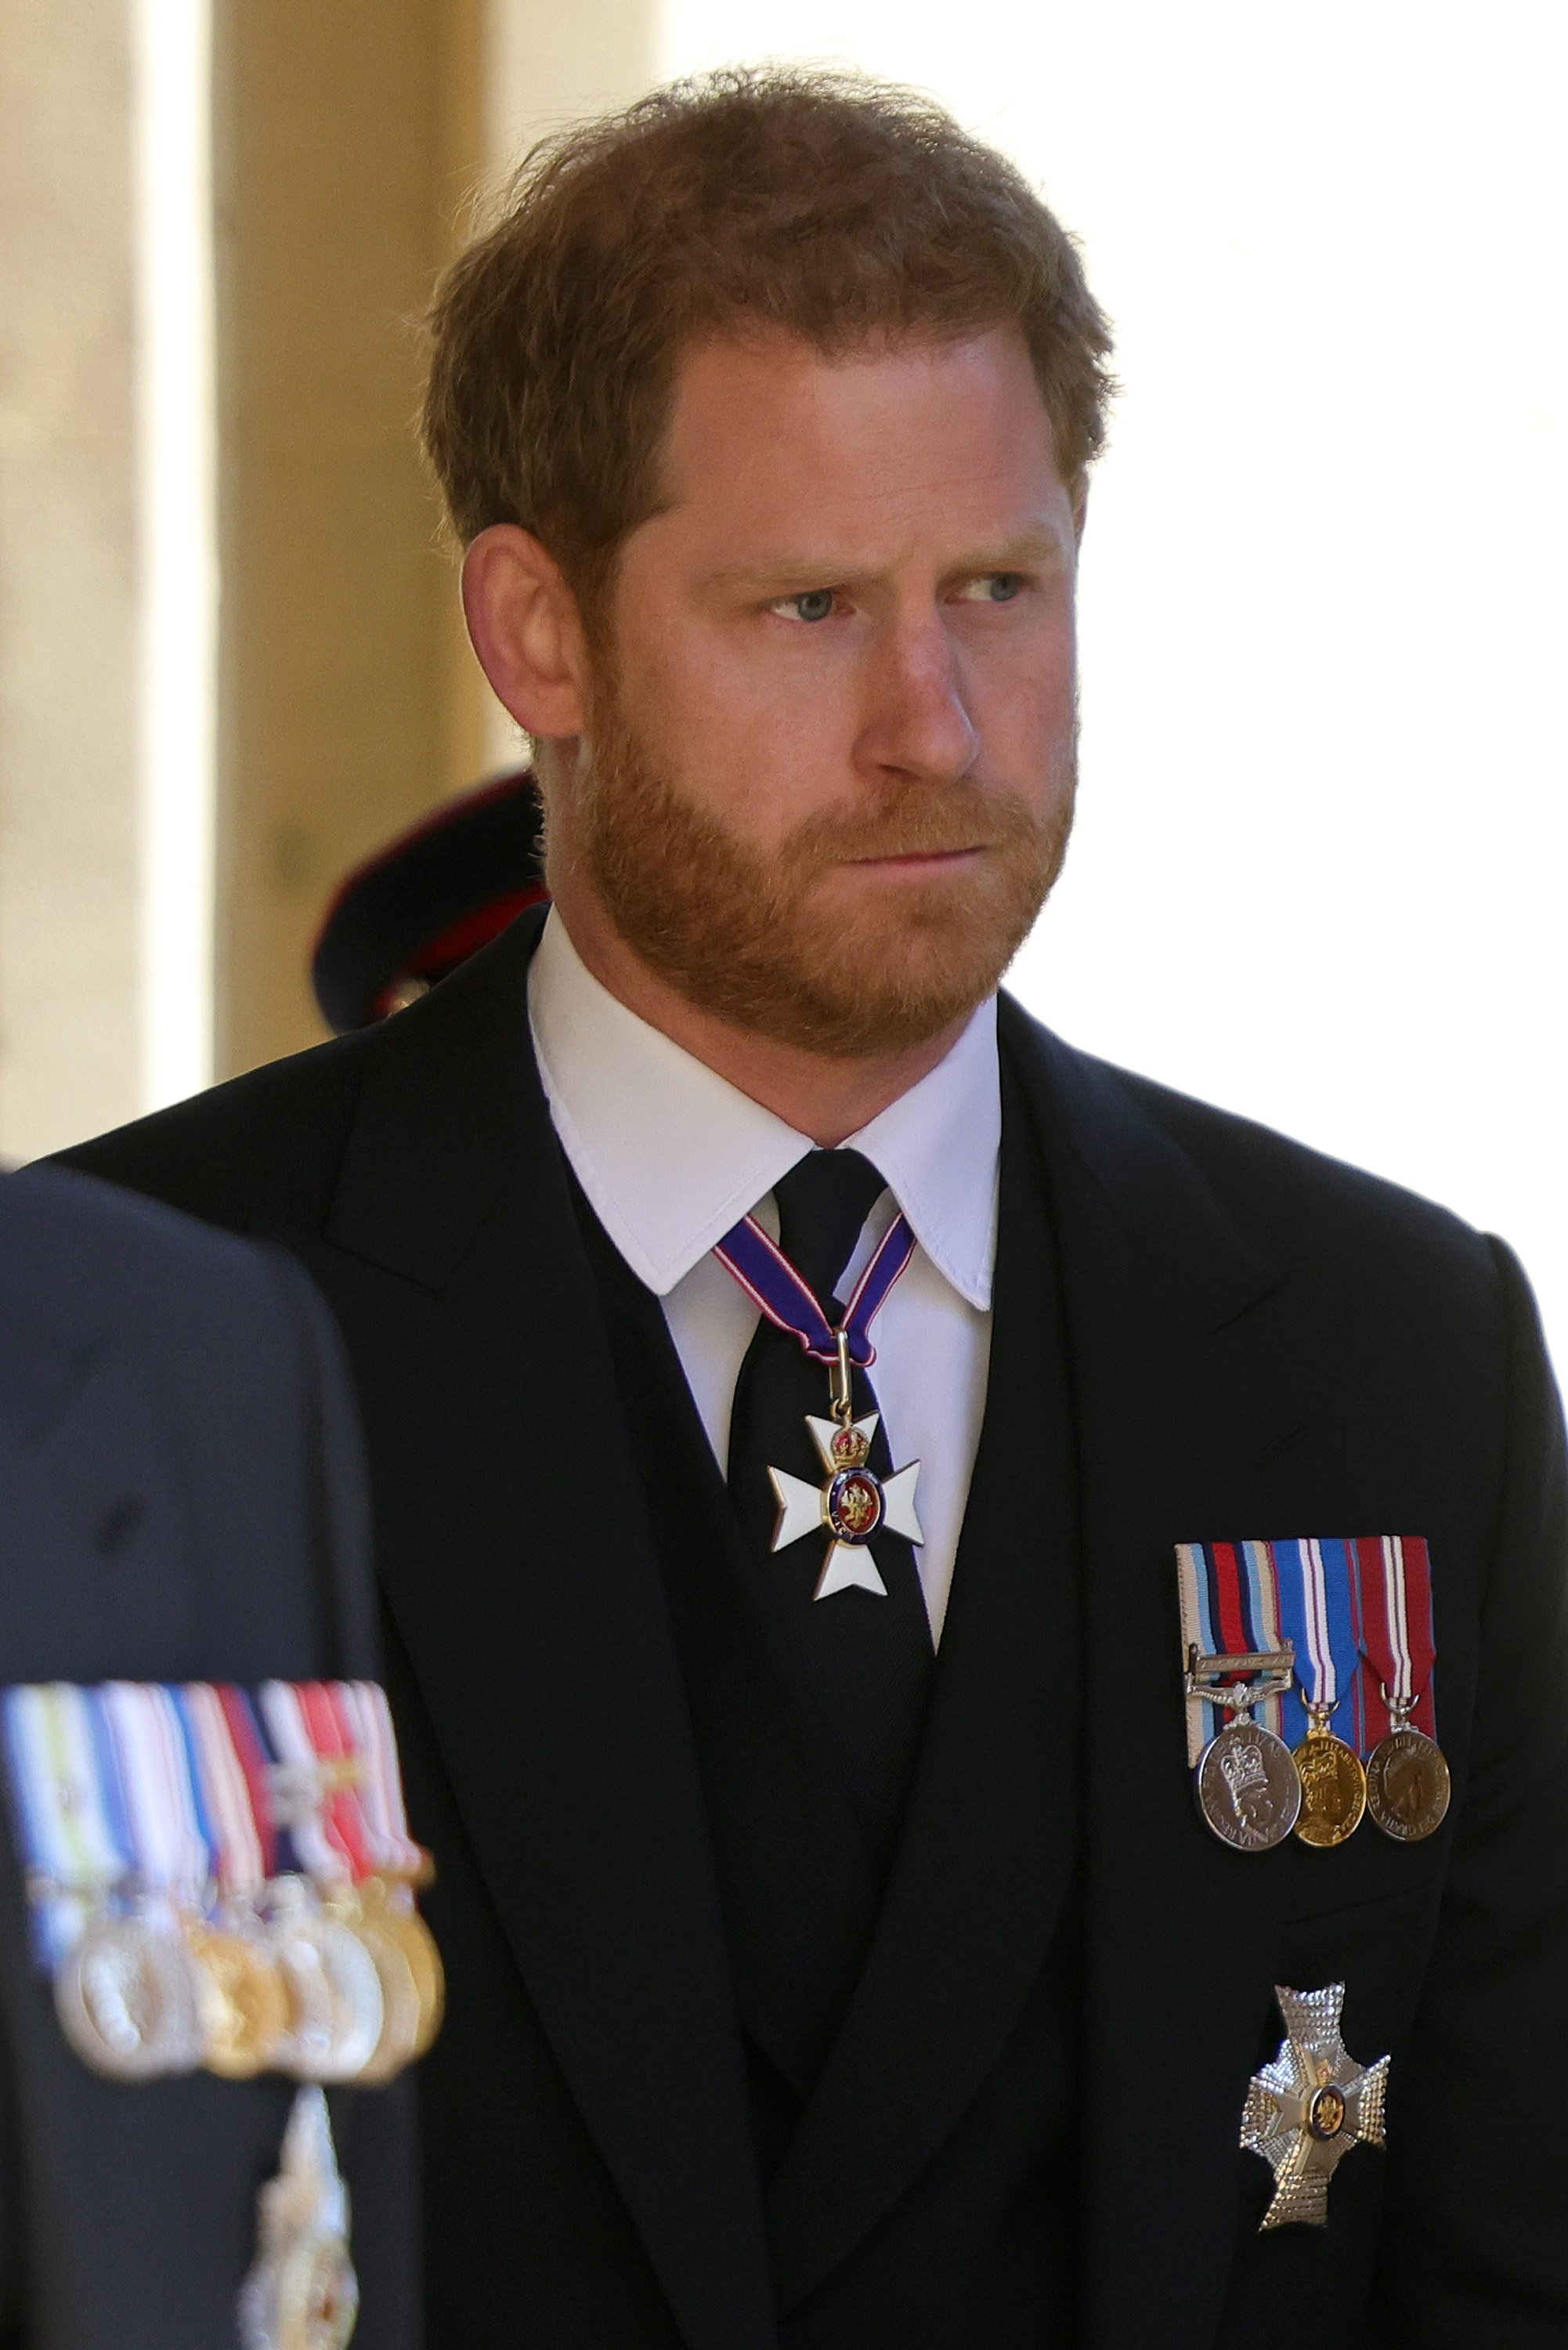 Prince Harry, Duke of Sussex during the funeral of Prince Philip, Duke of Edinburgh at Windsor Castle on April 17, 2021 in Windsor, England. | Source: Getty Images